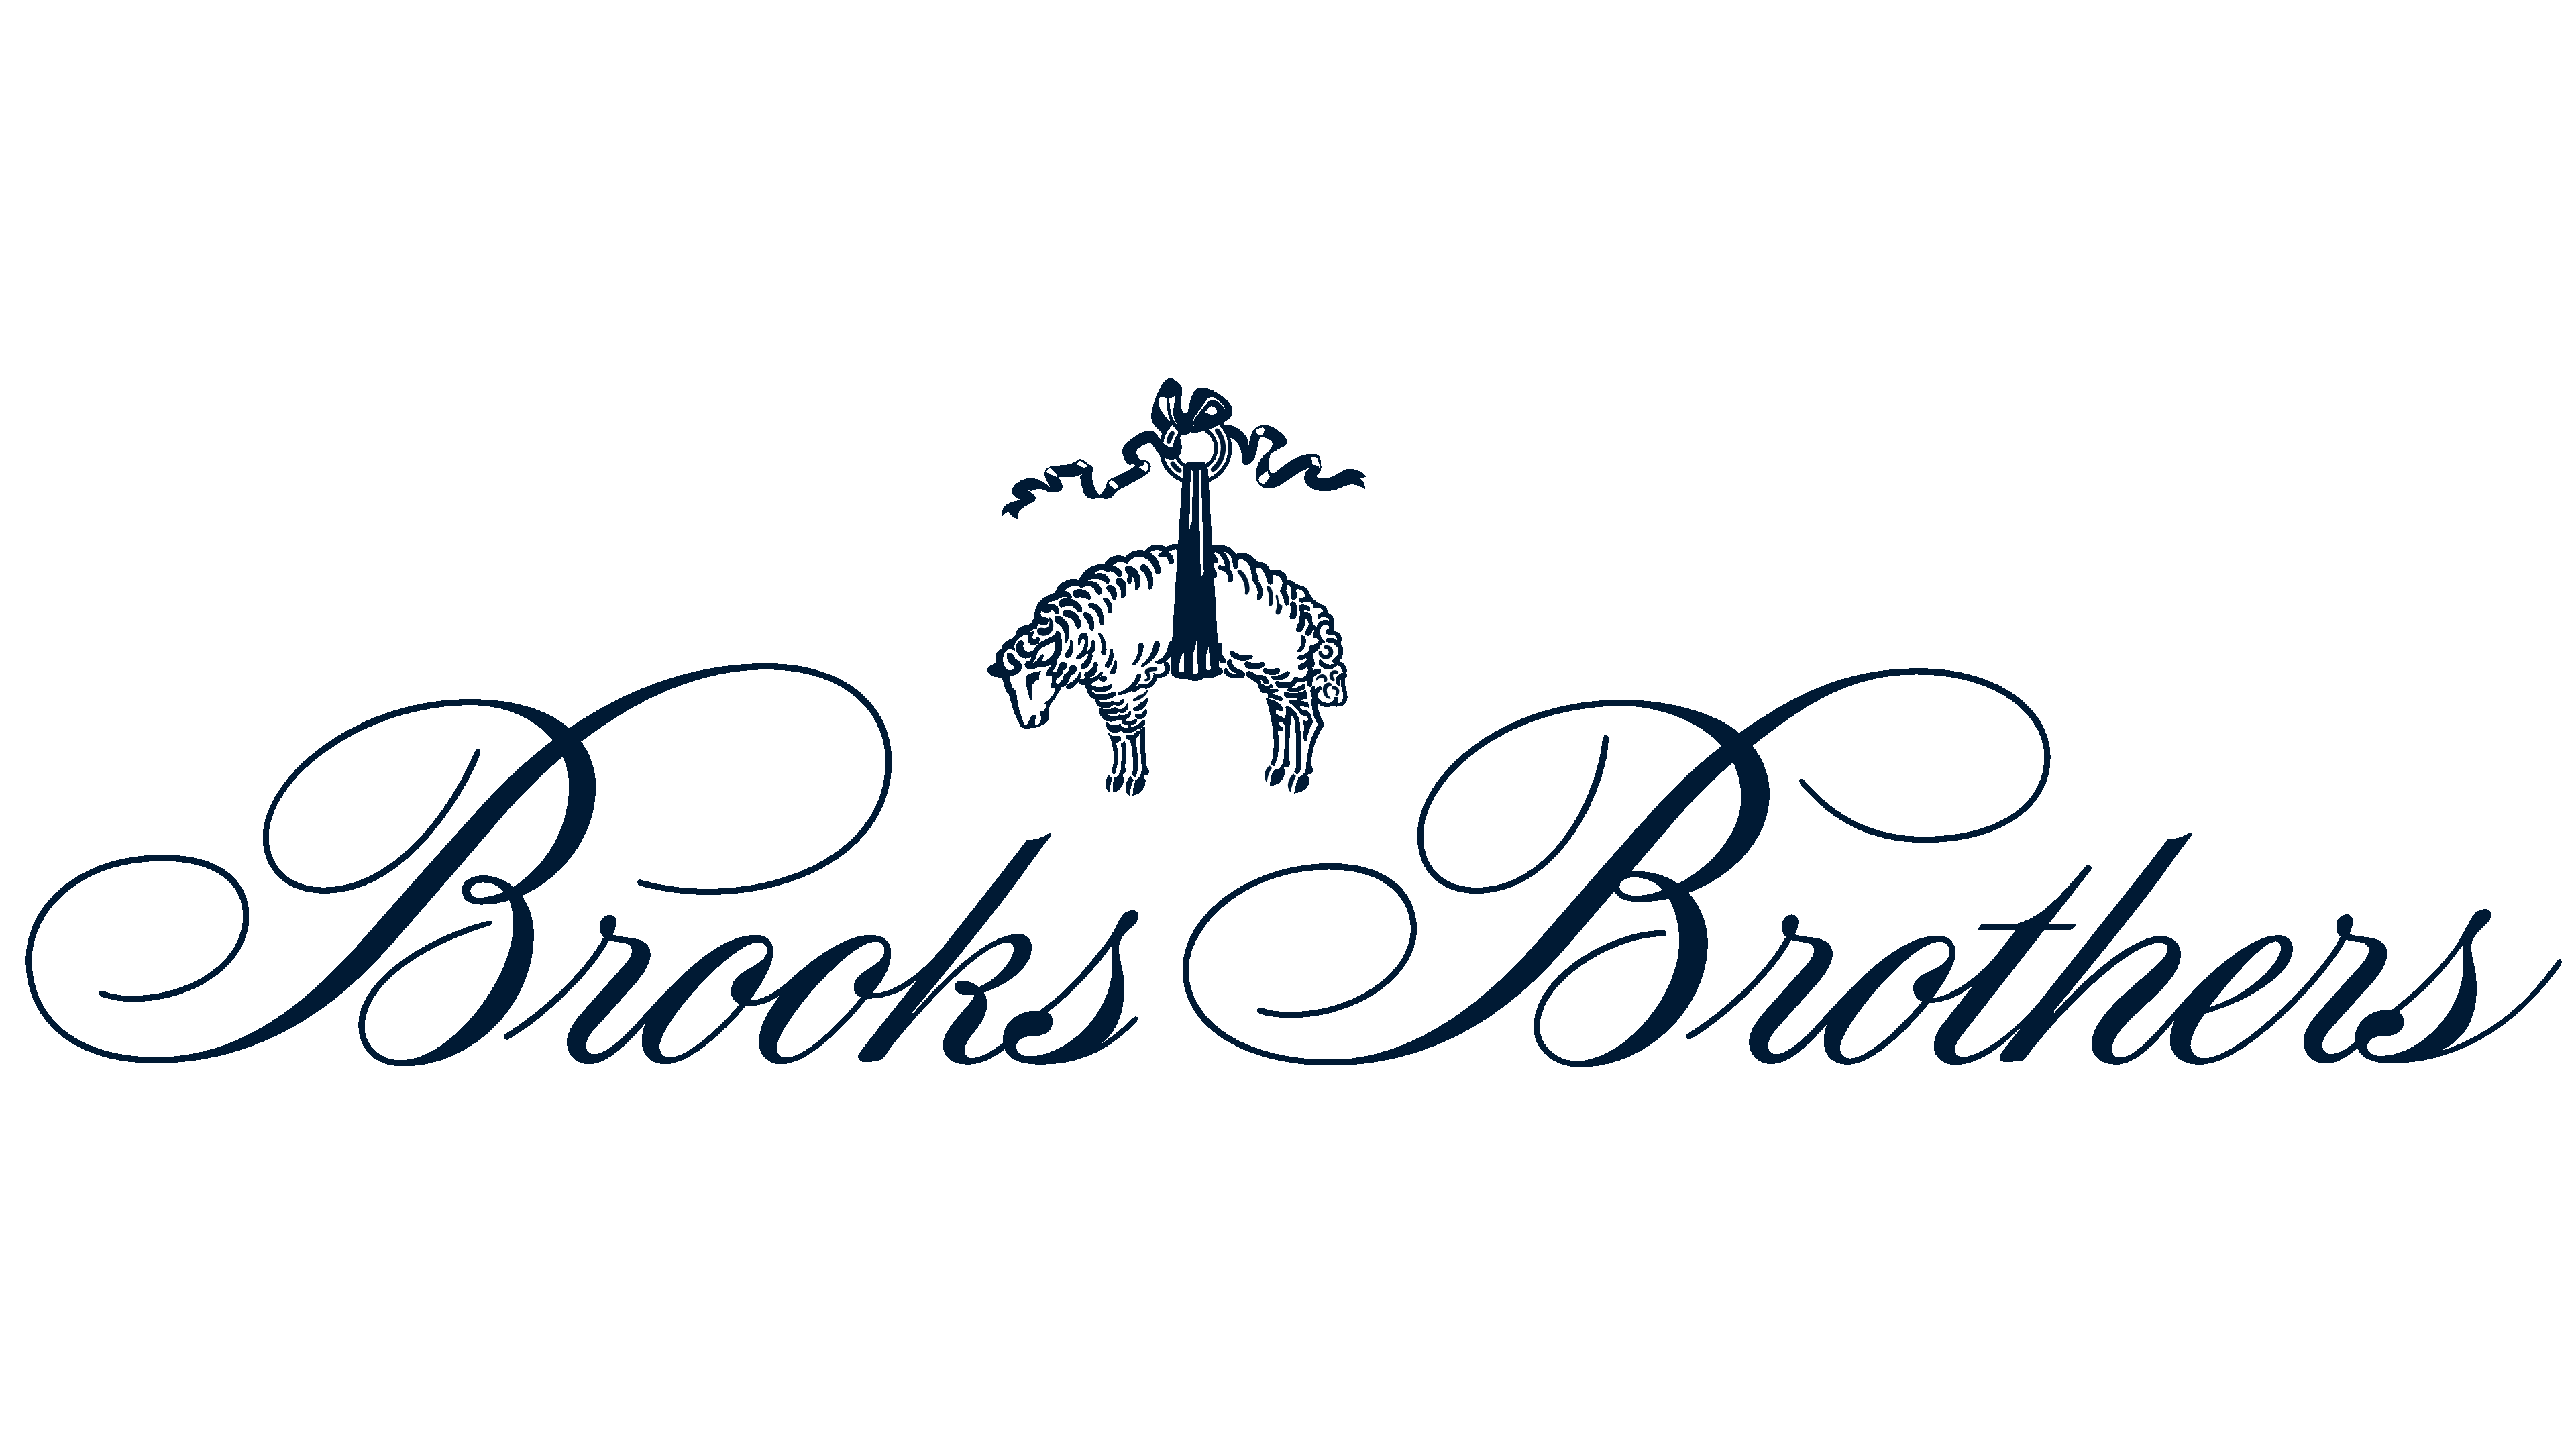 Brooks Brothers Coupons & Promo Codes